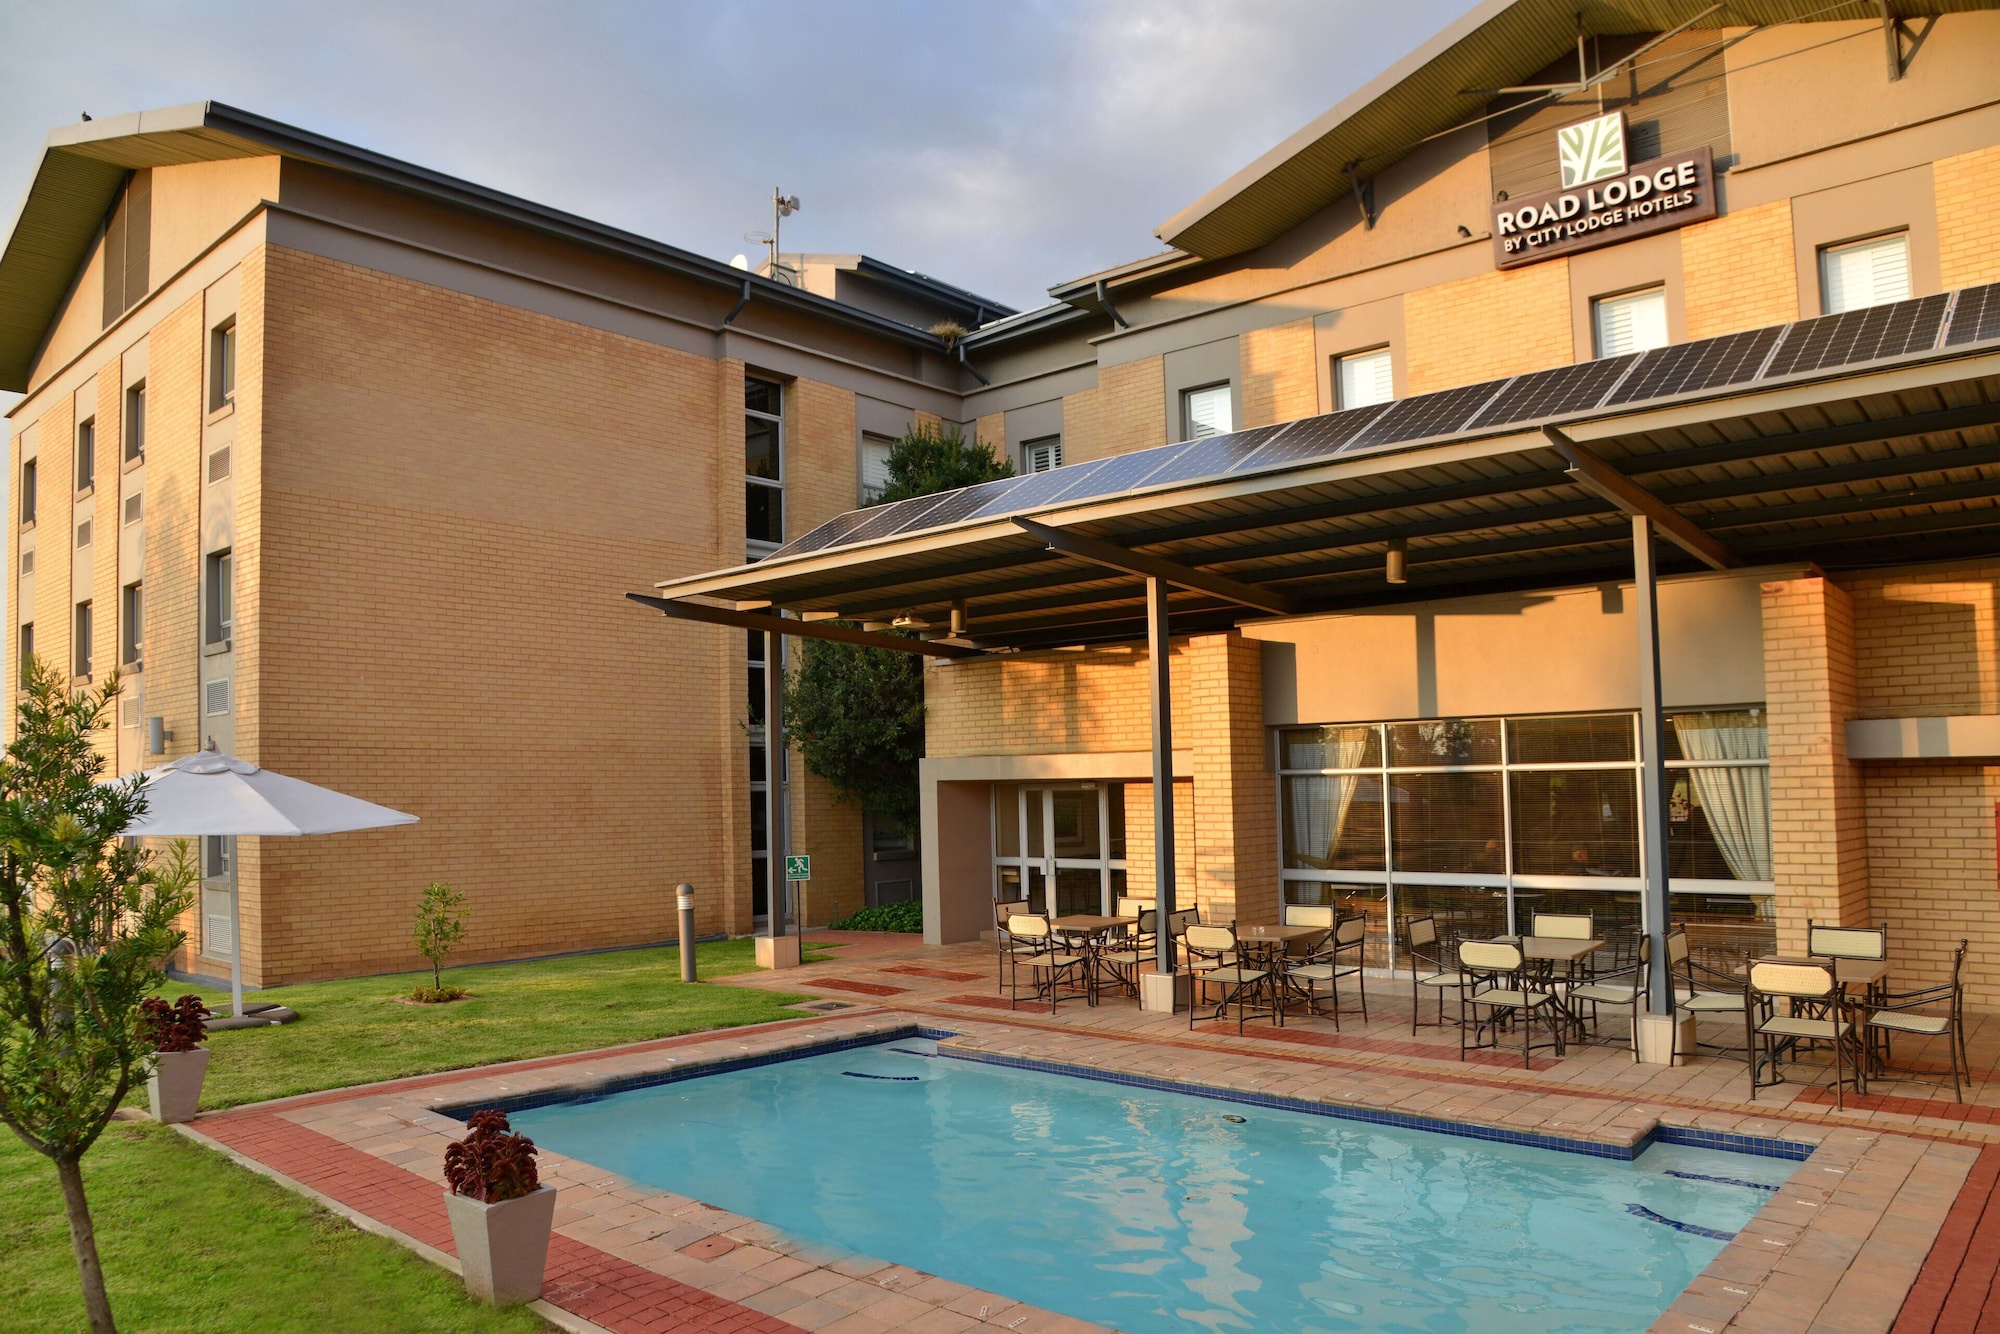 Road lodge south gate hotel Johannesburg south Africa